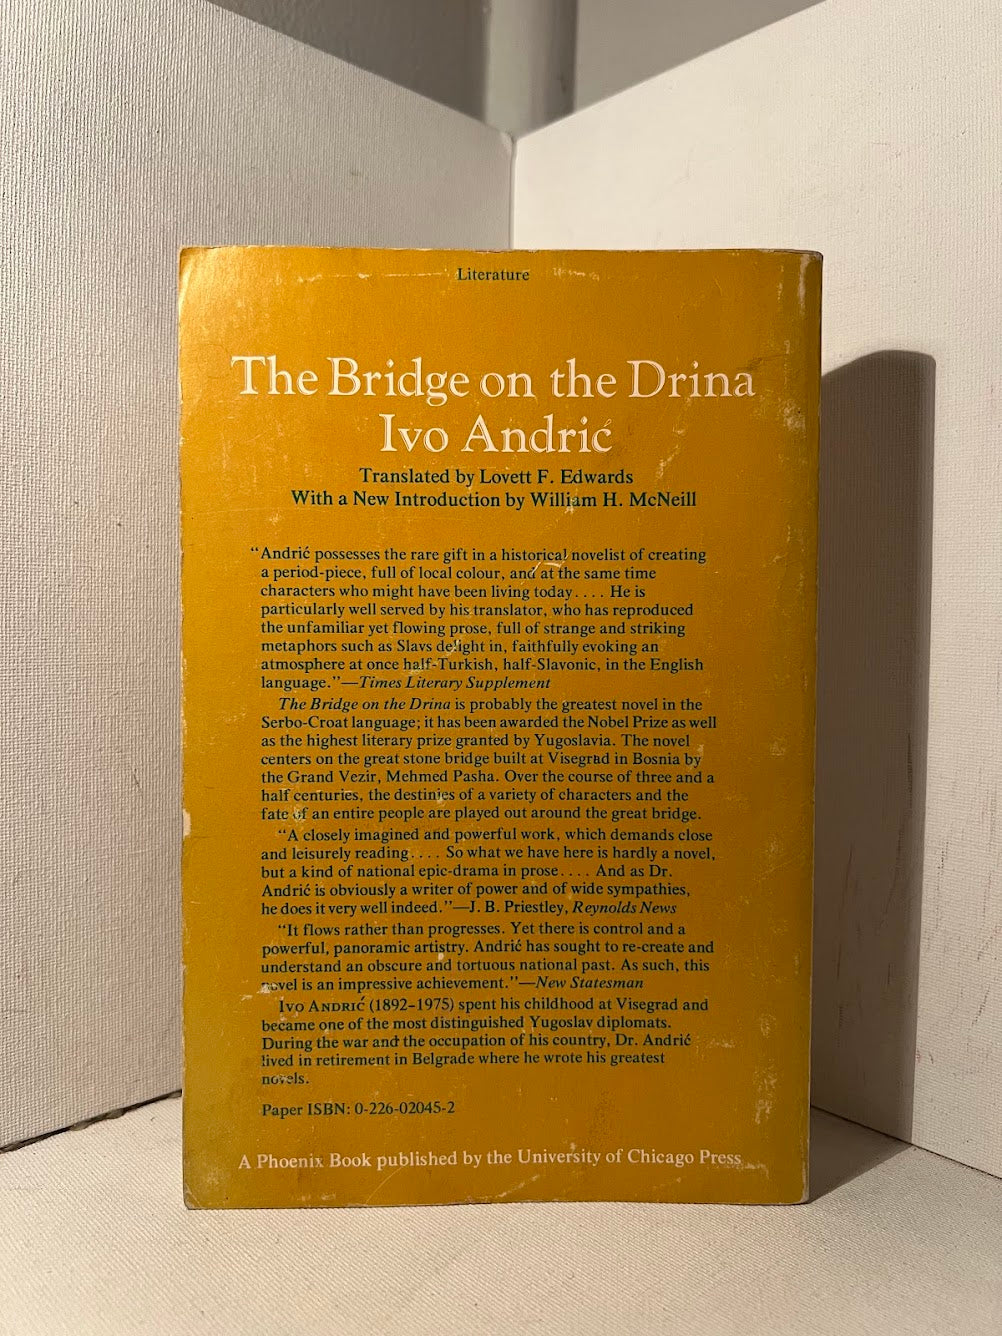 The Bridge on the Drina by Ivo Andric